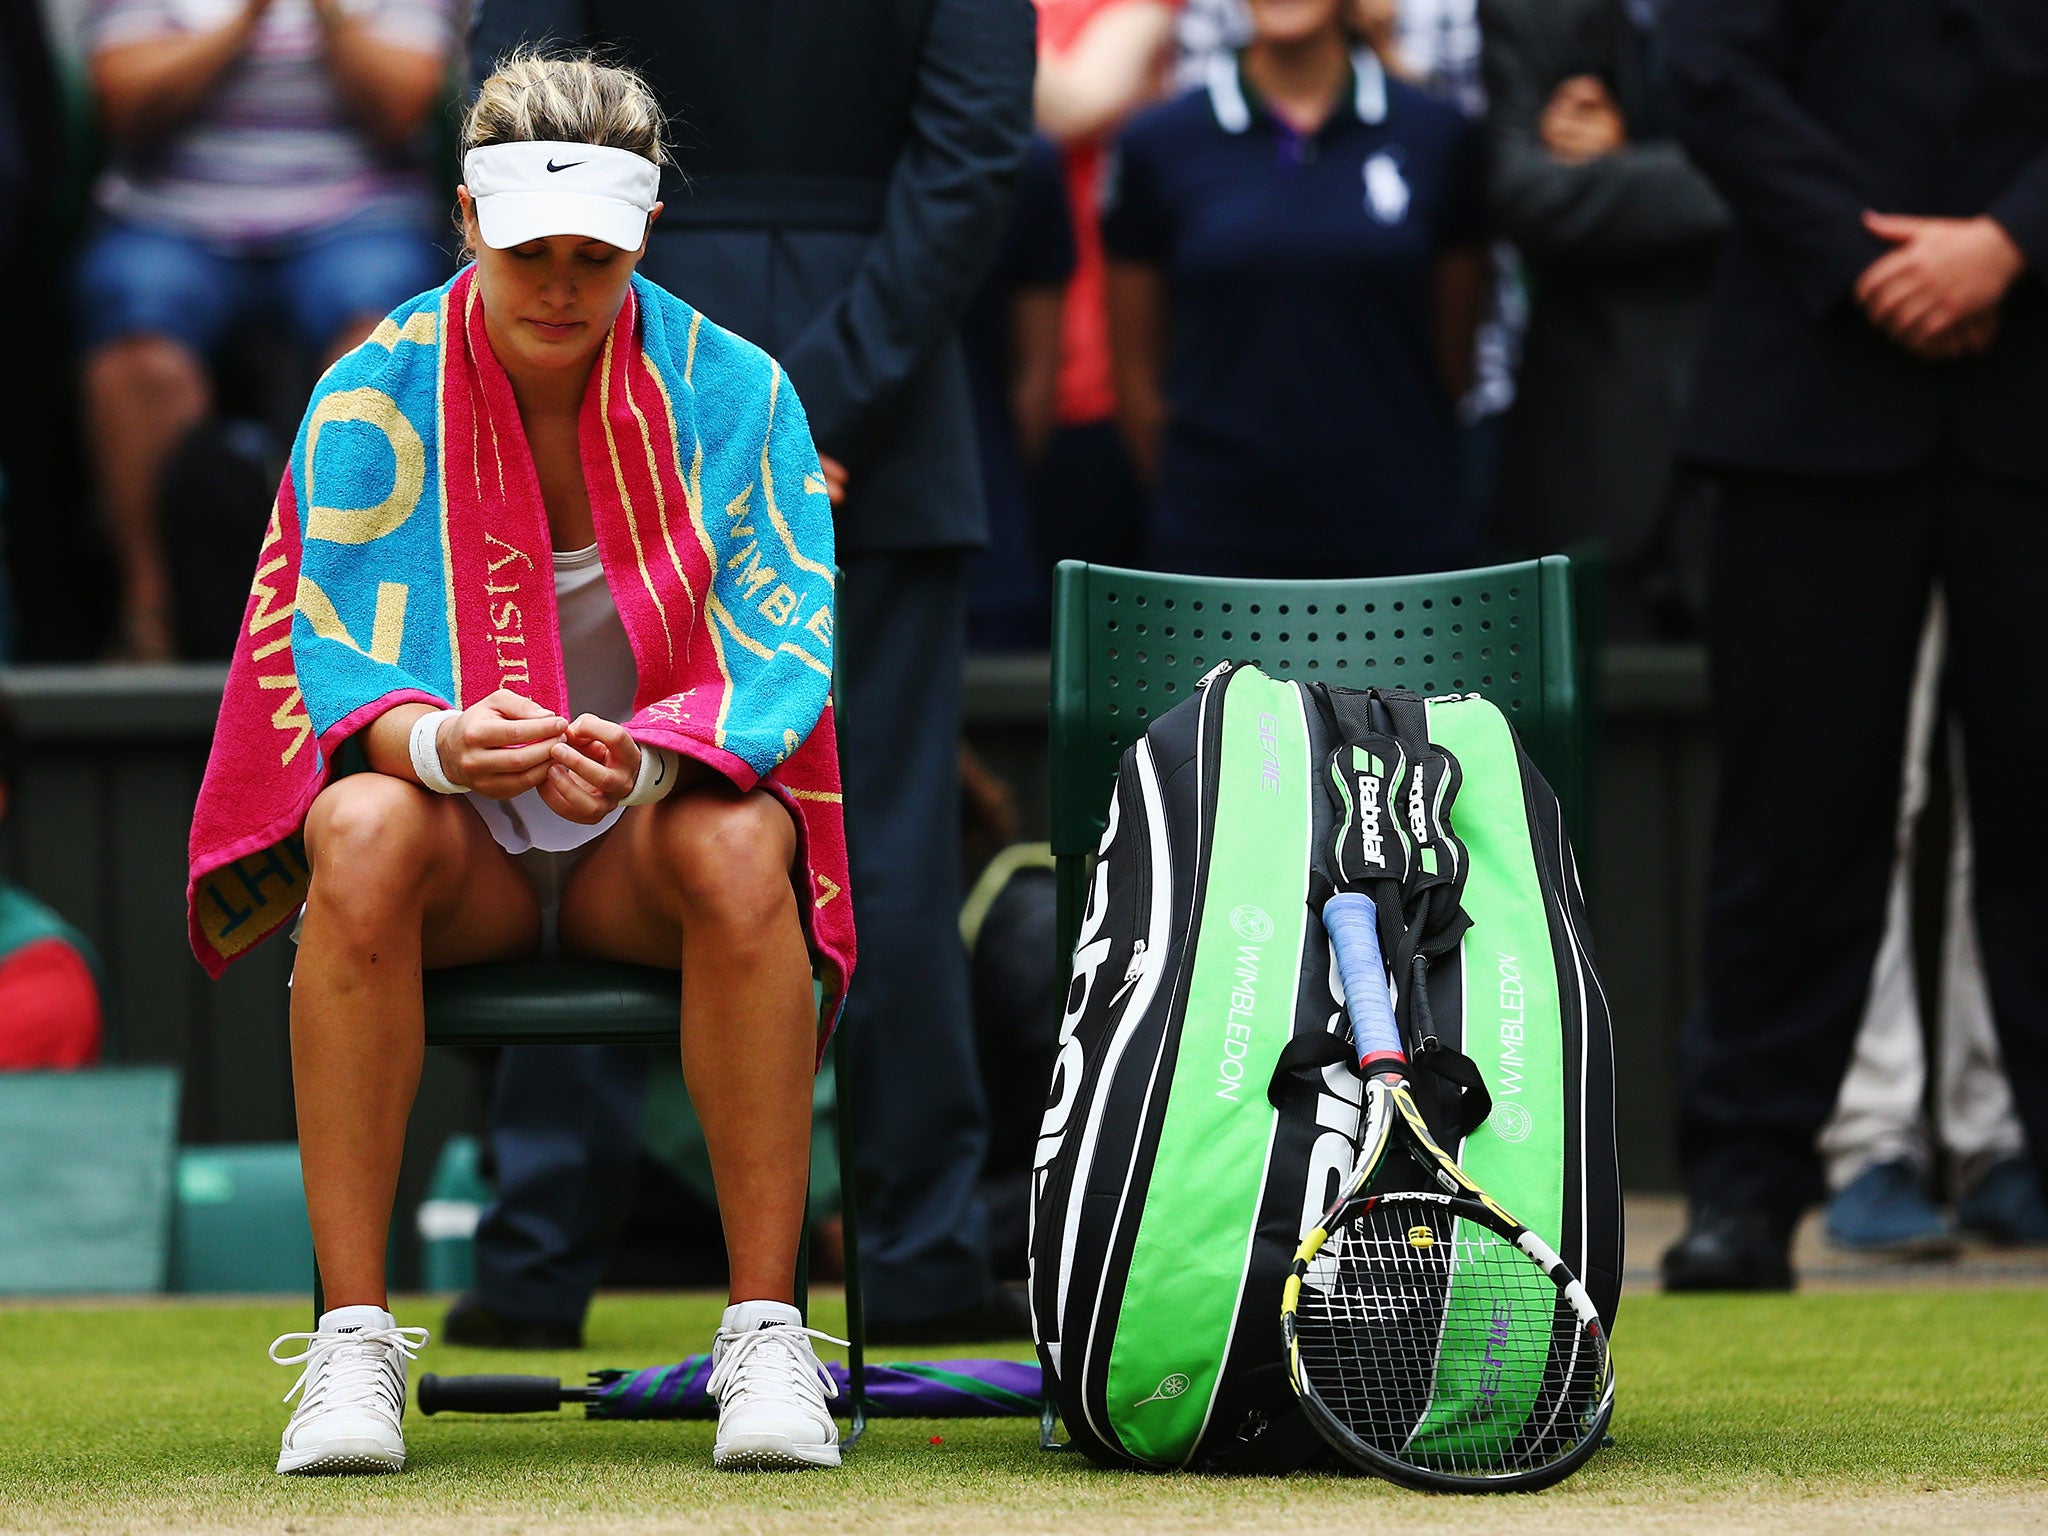 Eugenie Bouchard comes to terms with her defeat in this year’s Wimbledon final